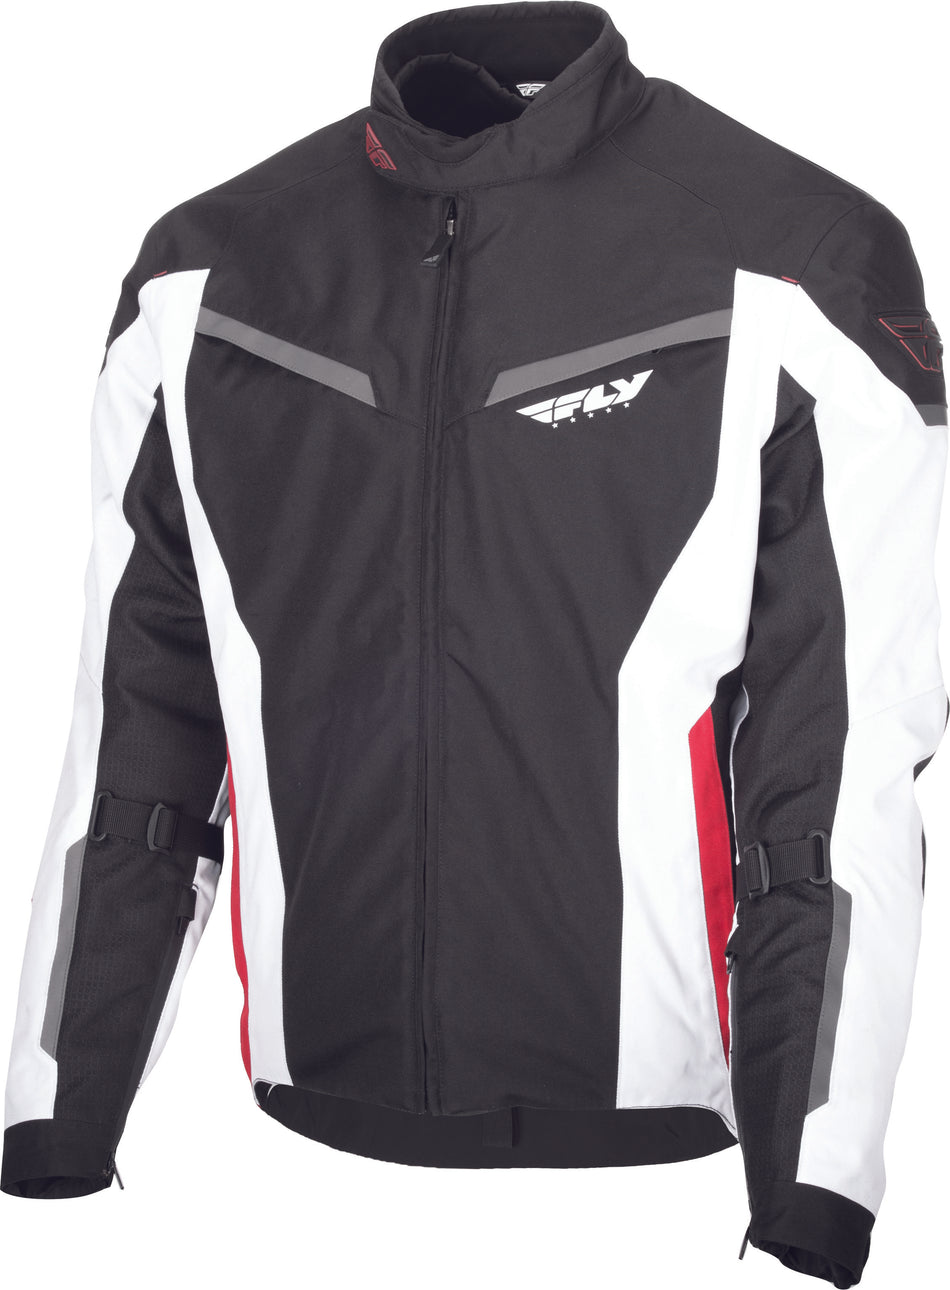 FLY RACING Strata Jacket Black/White/Red 4x 477-2101-8